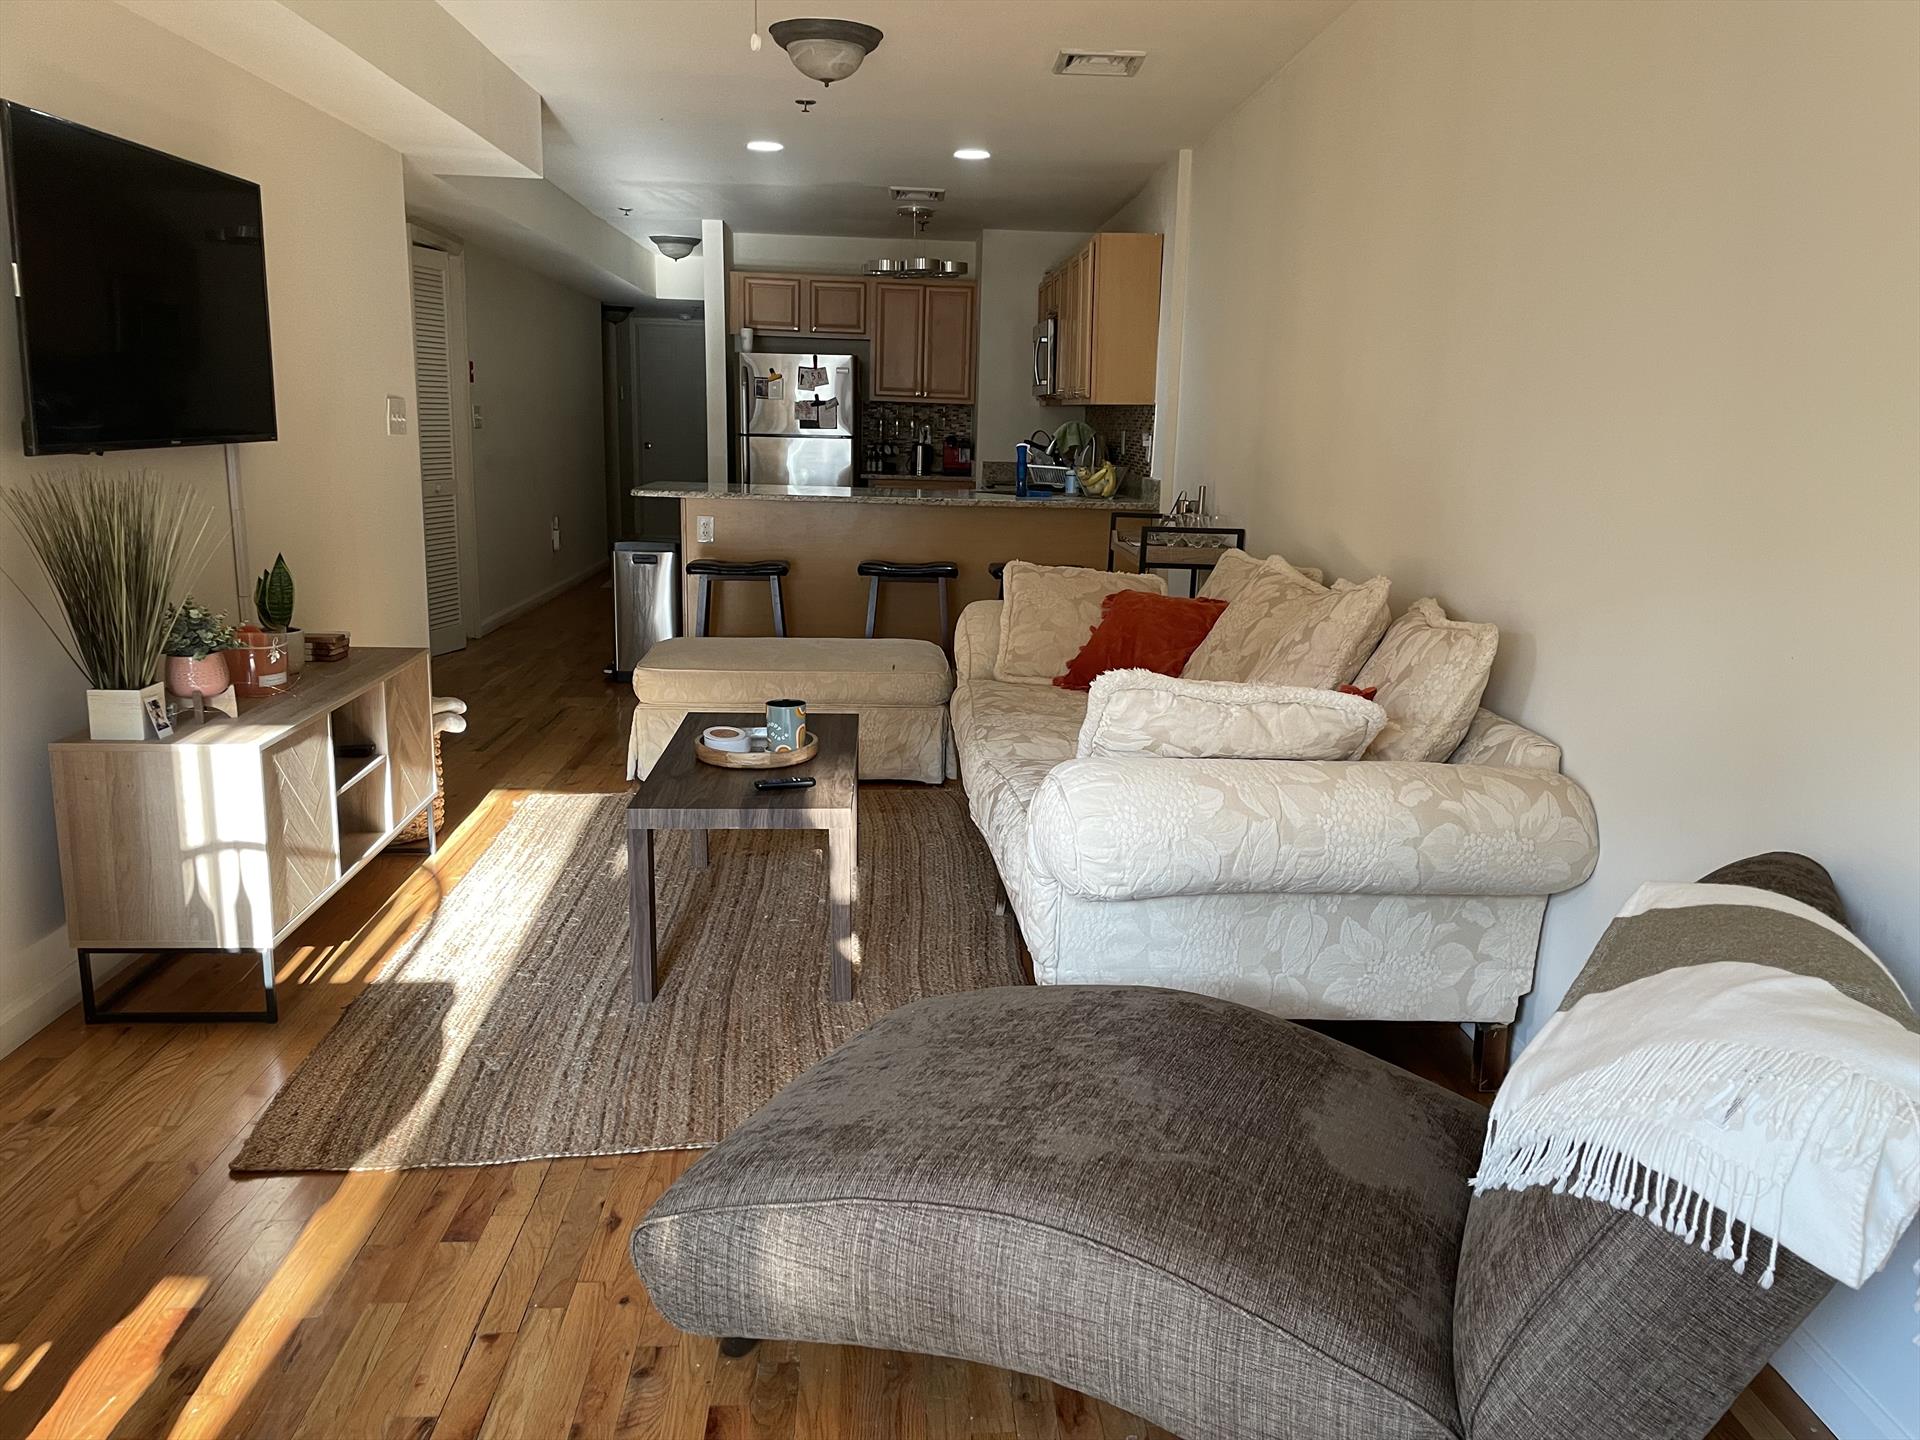 DOWNTOWN HOBOKEN-5th & Bloomfield! Renovated 3 BR/2 Bath apt in Brownstone Bldg along a tree-lined quiet street. Walk to PATH, private patio w/table. Common yard. New modern open kitchen w/granite Breakfast bar & glass back splash.SS sink/Faucet, Stainless Steel appliances: Micro/ref/gas stove & D/W. Large windows in all rooms. W/D room on 1st floor. Central Air, HDWD floors, ceiling fan, living room has space for dining table. Closet & windows in all BR's. Street level (not basement), private patio area off back with table, umbrella, and chairs. The landscaped common yard is great for BBQ. There is a bike rack in front. The apartment will be professionally cleaned & touched up for the new tenant. Close to Bus/PATH. NO DOGS any size. NO SMOKERS-Cat ok w/pet rent +$25 per mo. GOOD CREDIT/REFS. EZ walk to PATH & Bus and Washington St stores & Pubs!